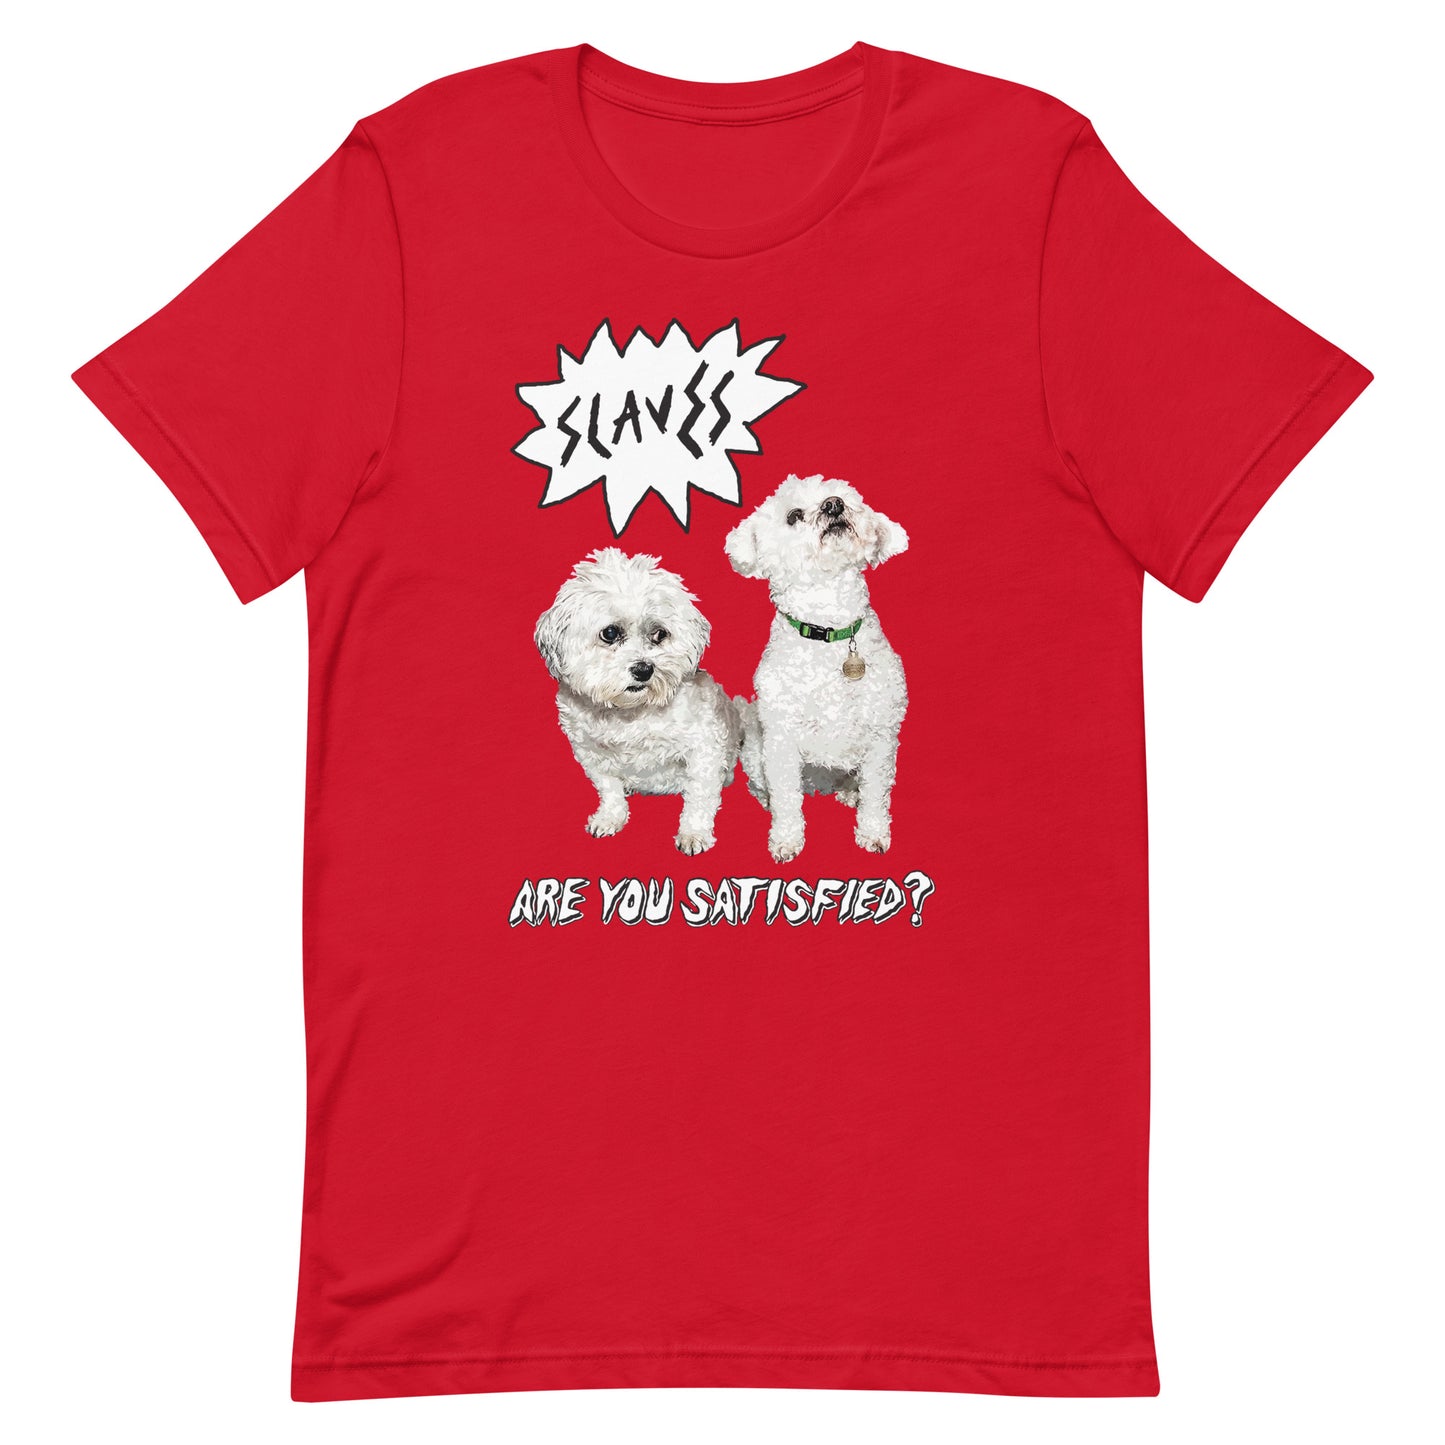 Slaves - Are You Satisfied? T-Shirt